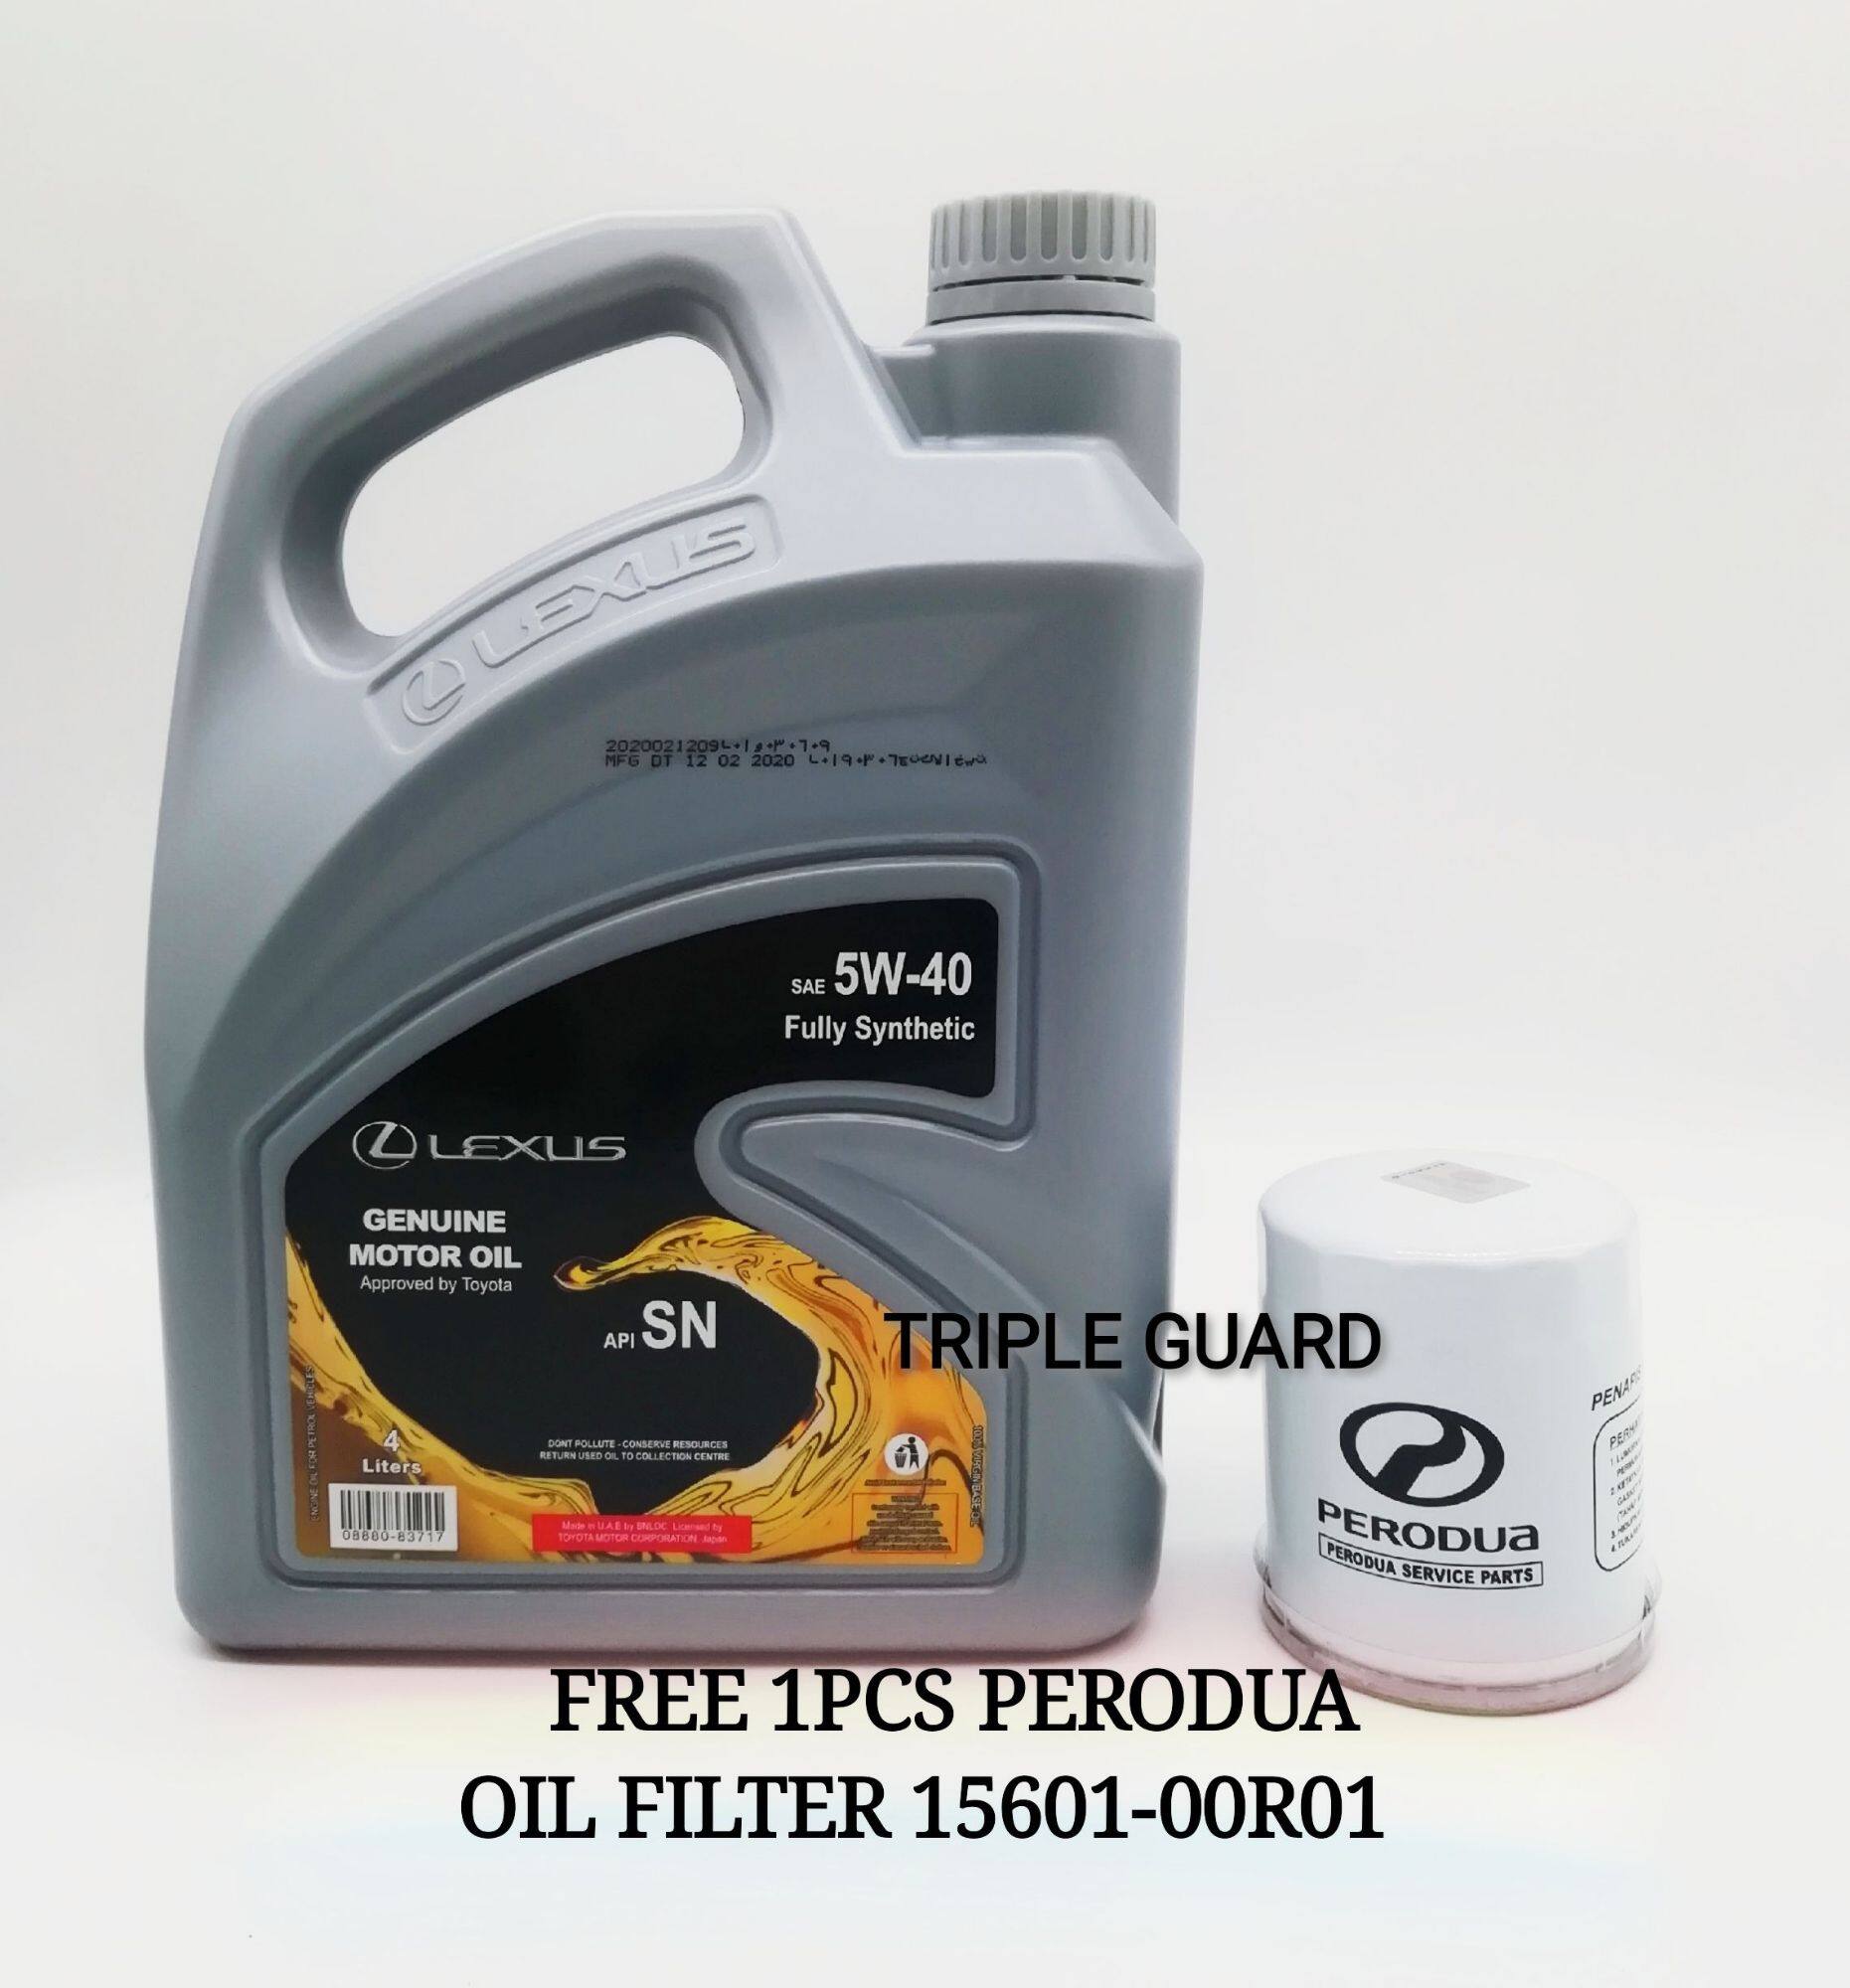 LEXUS FULLY SYNTHETIC 5W40 ENGINE OIL WITH PERODUA OIL FILTER